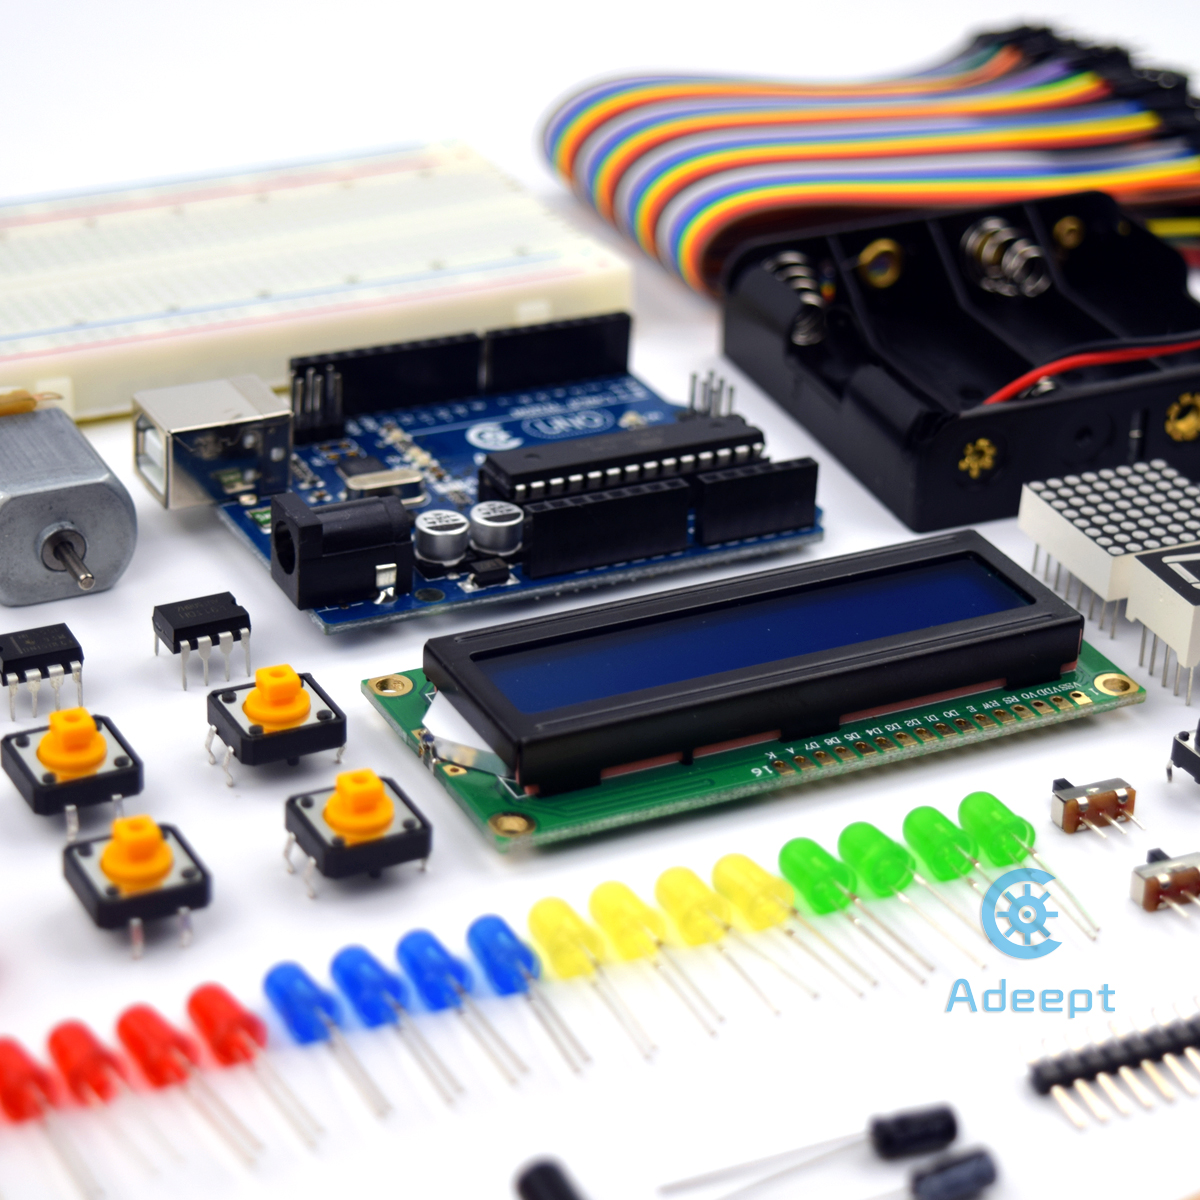 Adeept Super Starter Kit for Arduino Uno R3 - Click to Enlarge